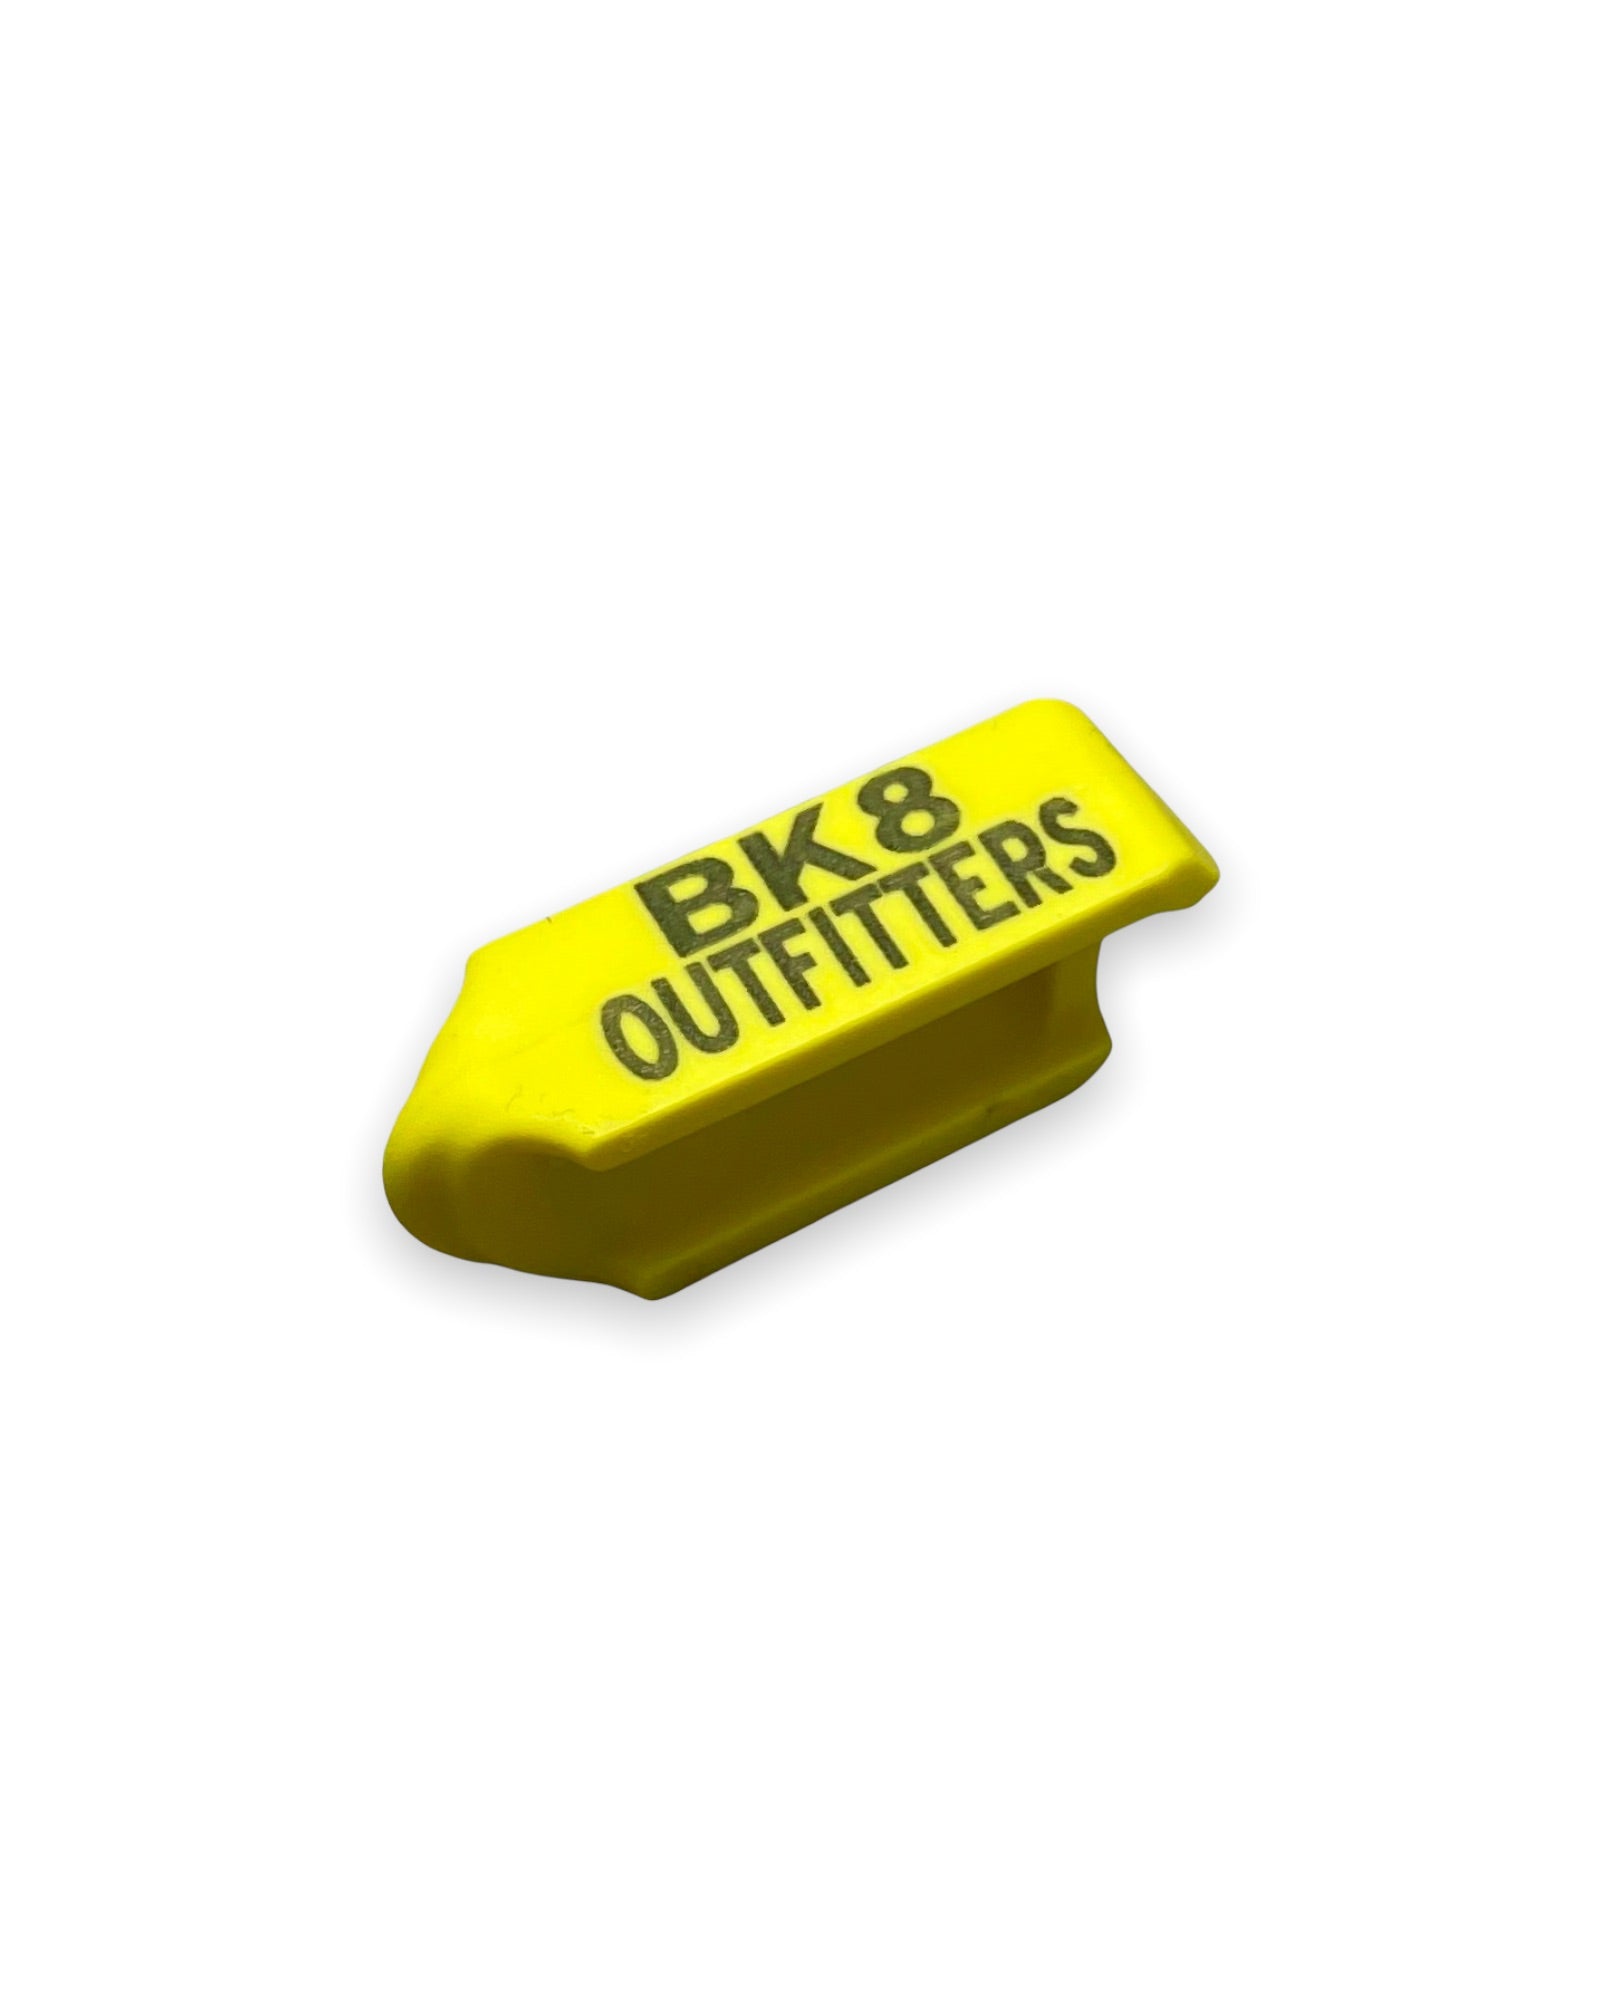 Sheep Tag | BK8 Outfitters | 2021 Yellow-1